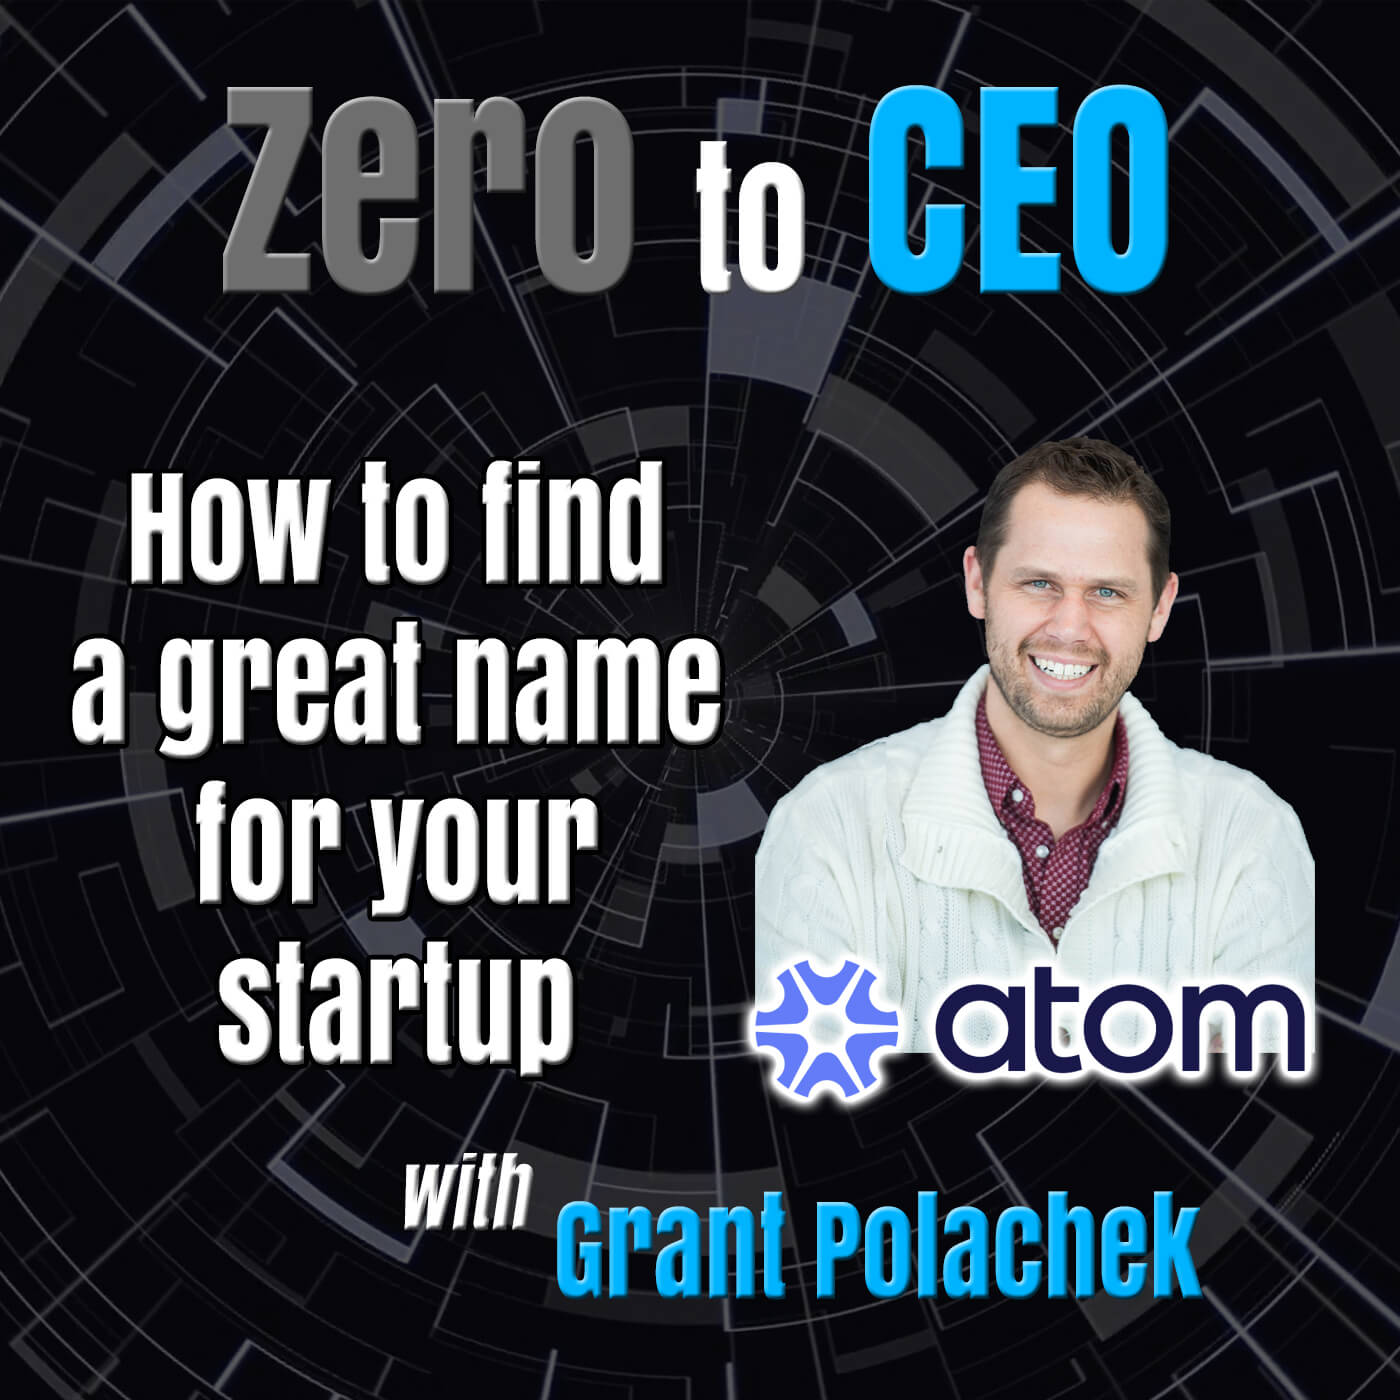 Zero to CEO: How to find a great name for your startup with Grant Polachek